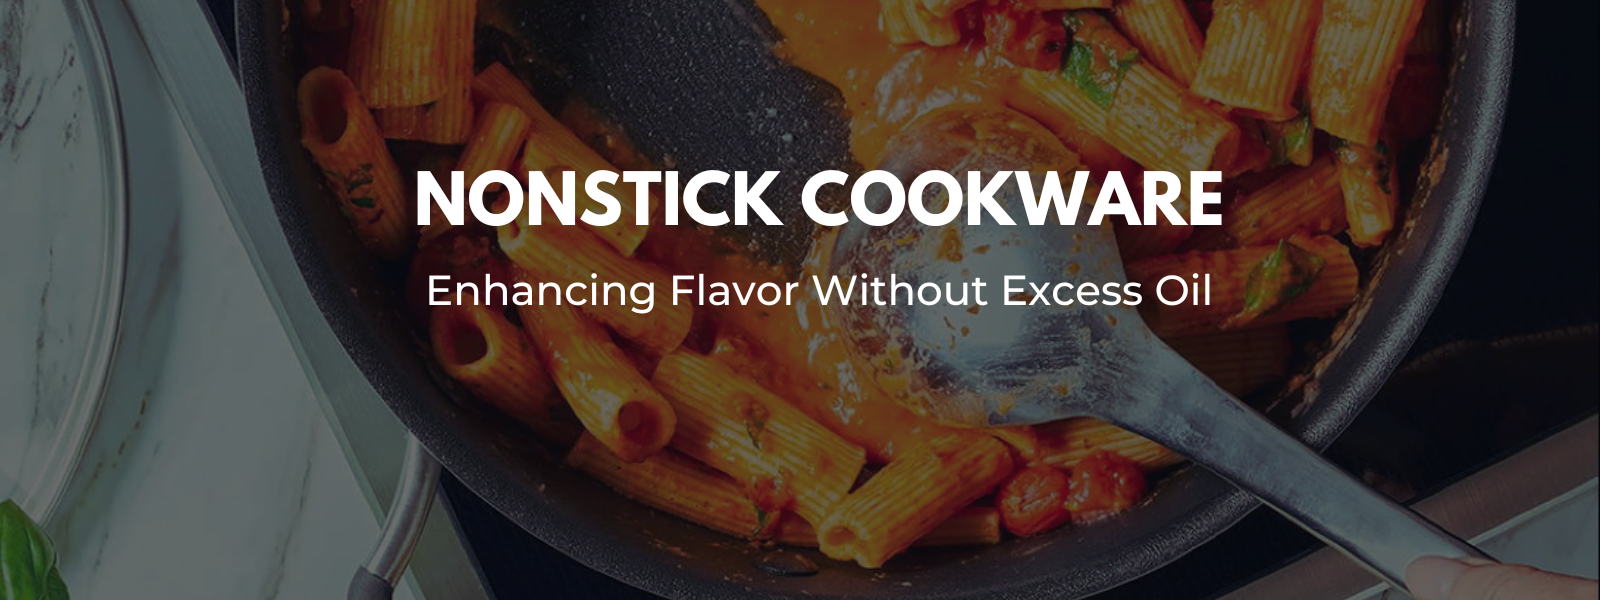 Nonstick Cookware: Enhancing Flavor Without Excess Oil